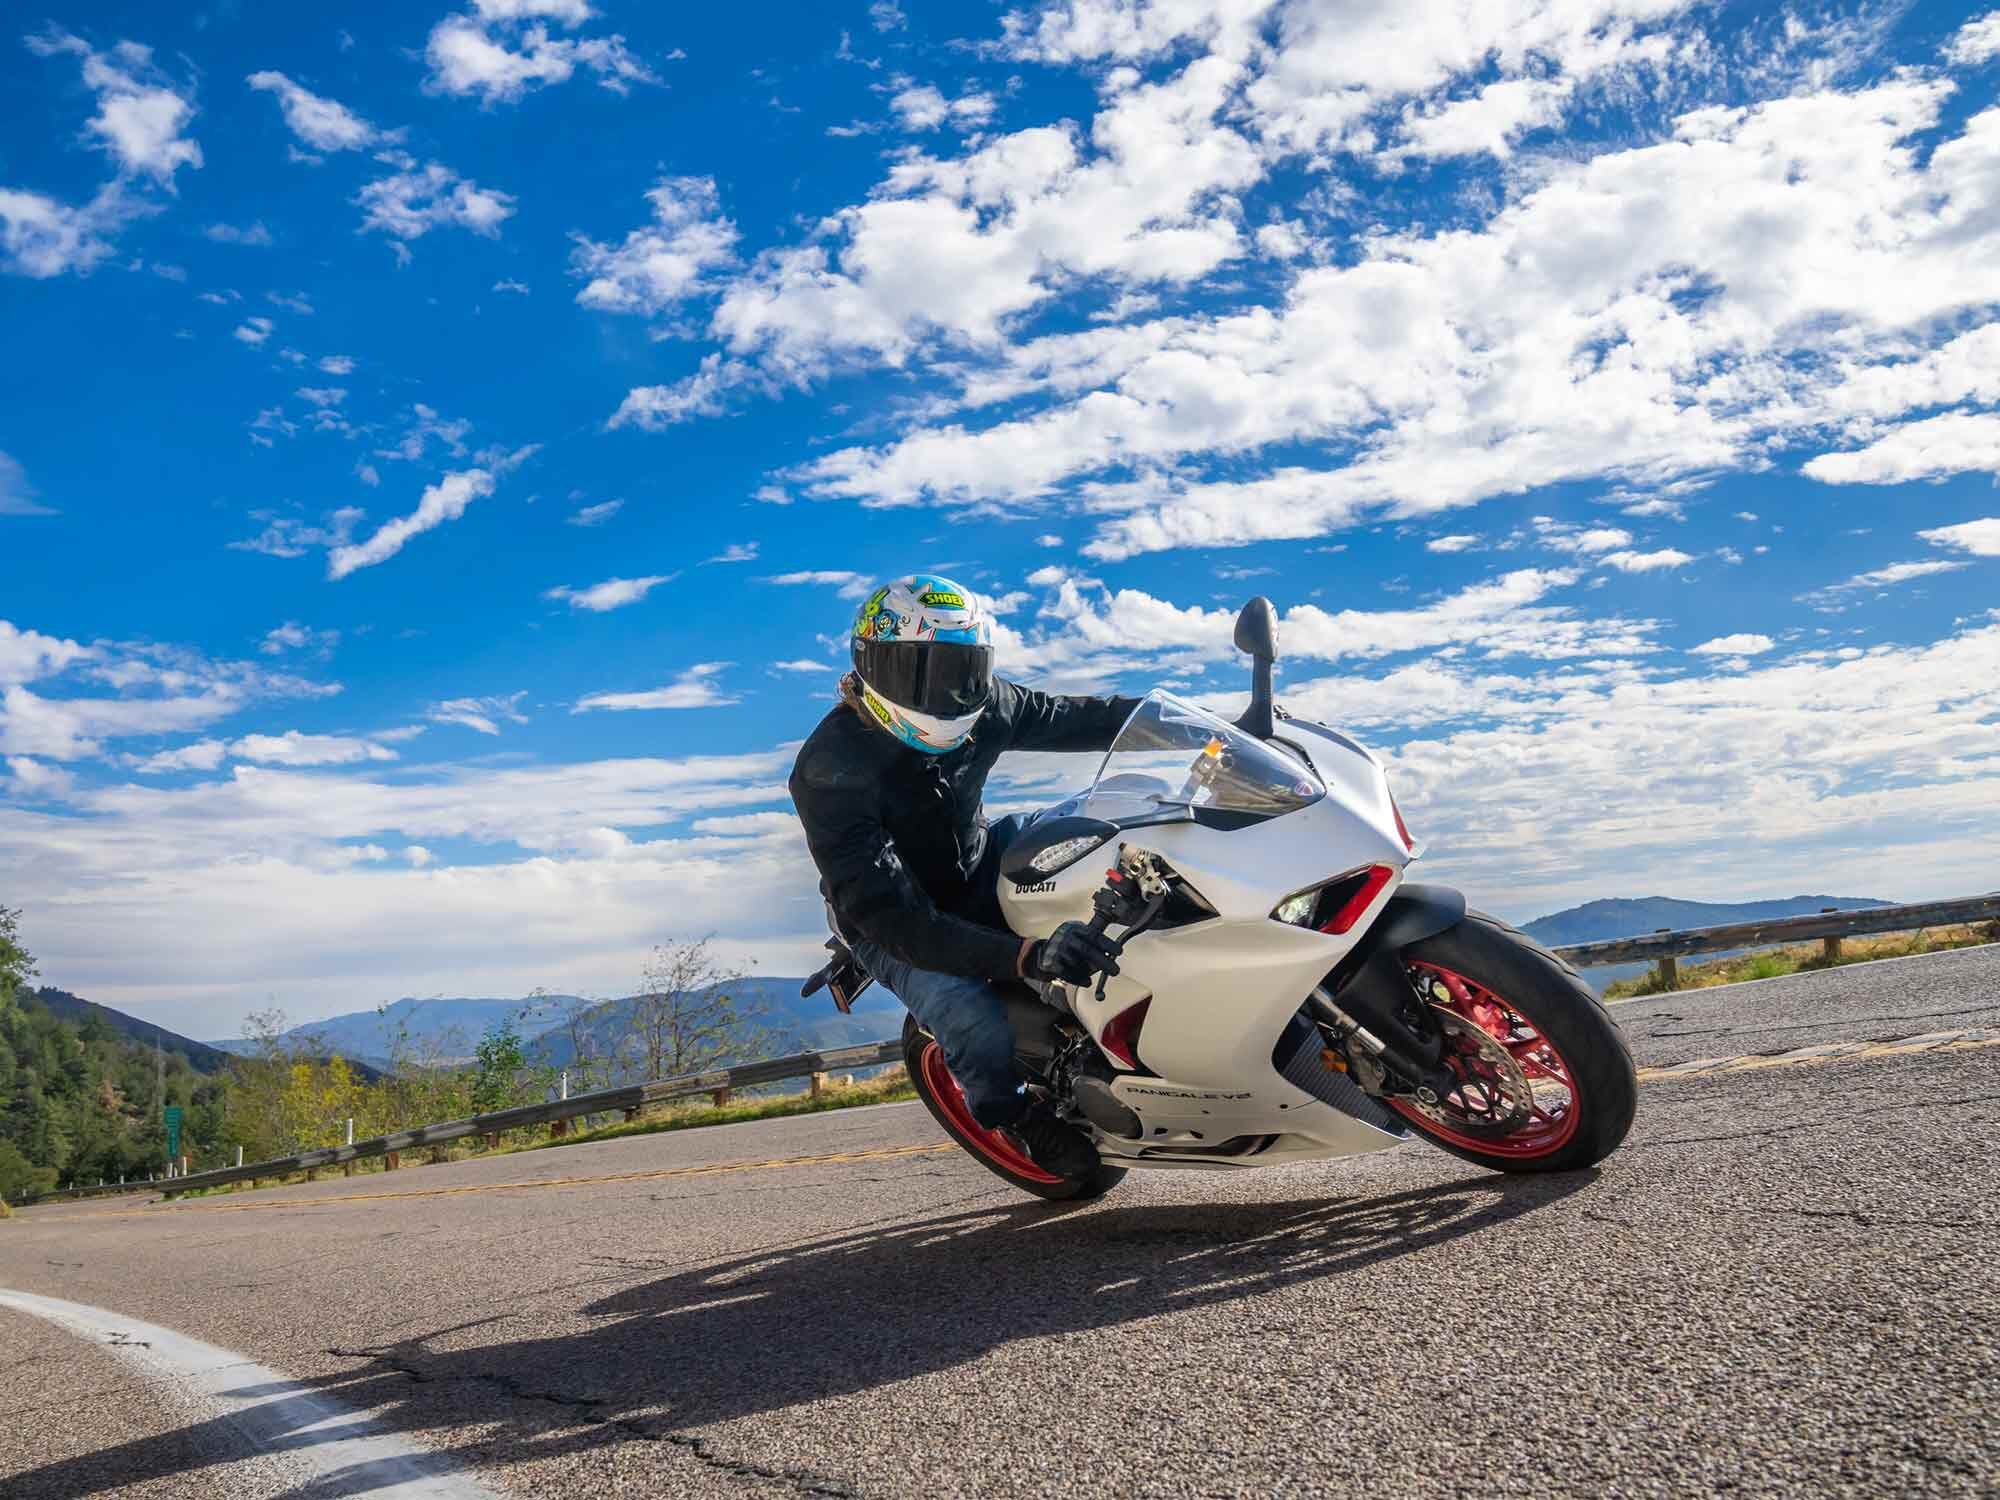 Burning daylight on the 2022 Ducati Panigale V2, an expensive but fun midsize-plus sportbike.